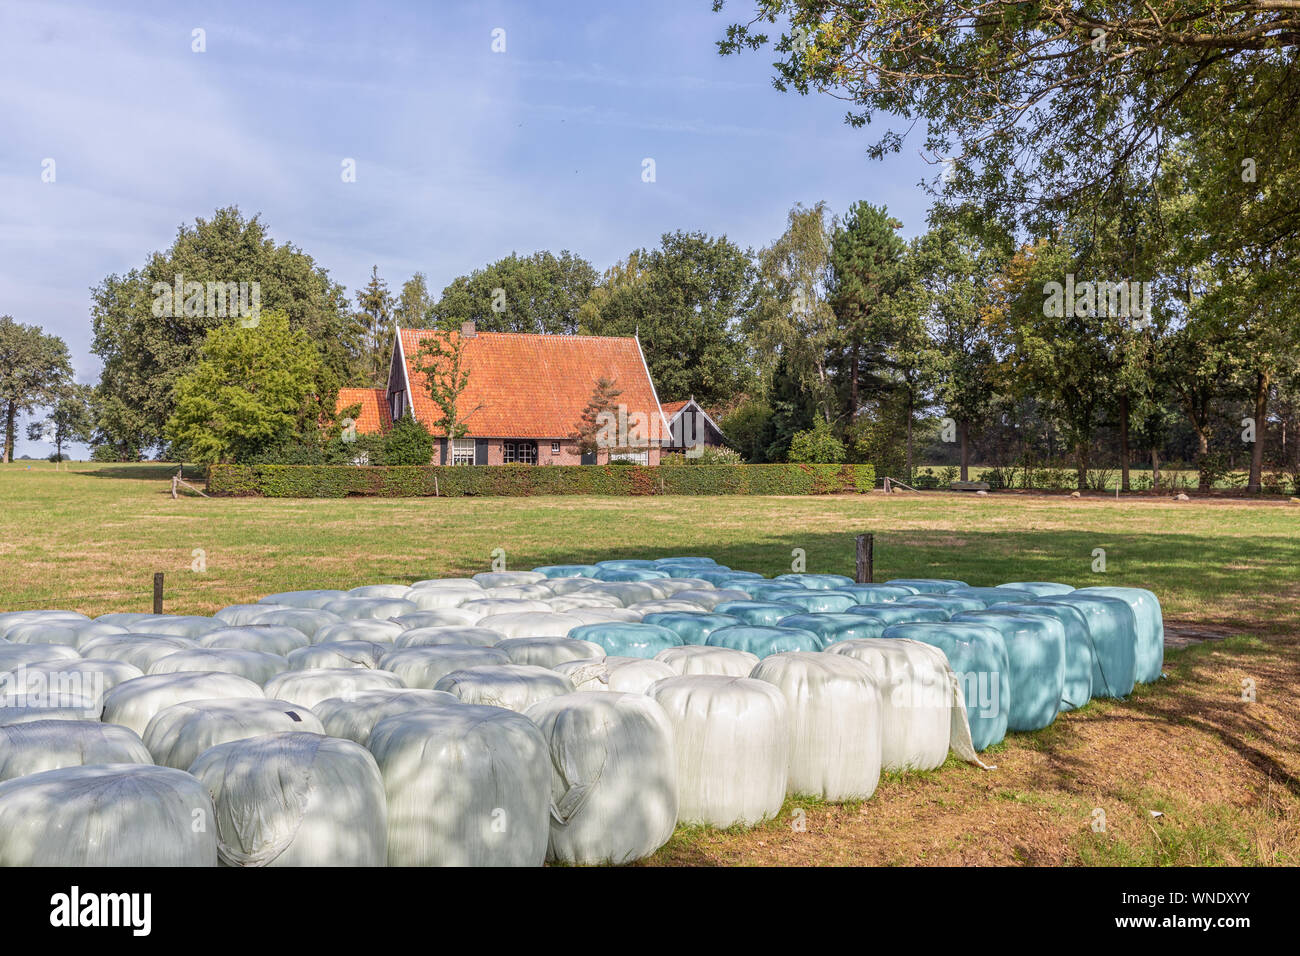 Dutch countryside region Twente with hay bales wrapped in plastic Stock Photo